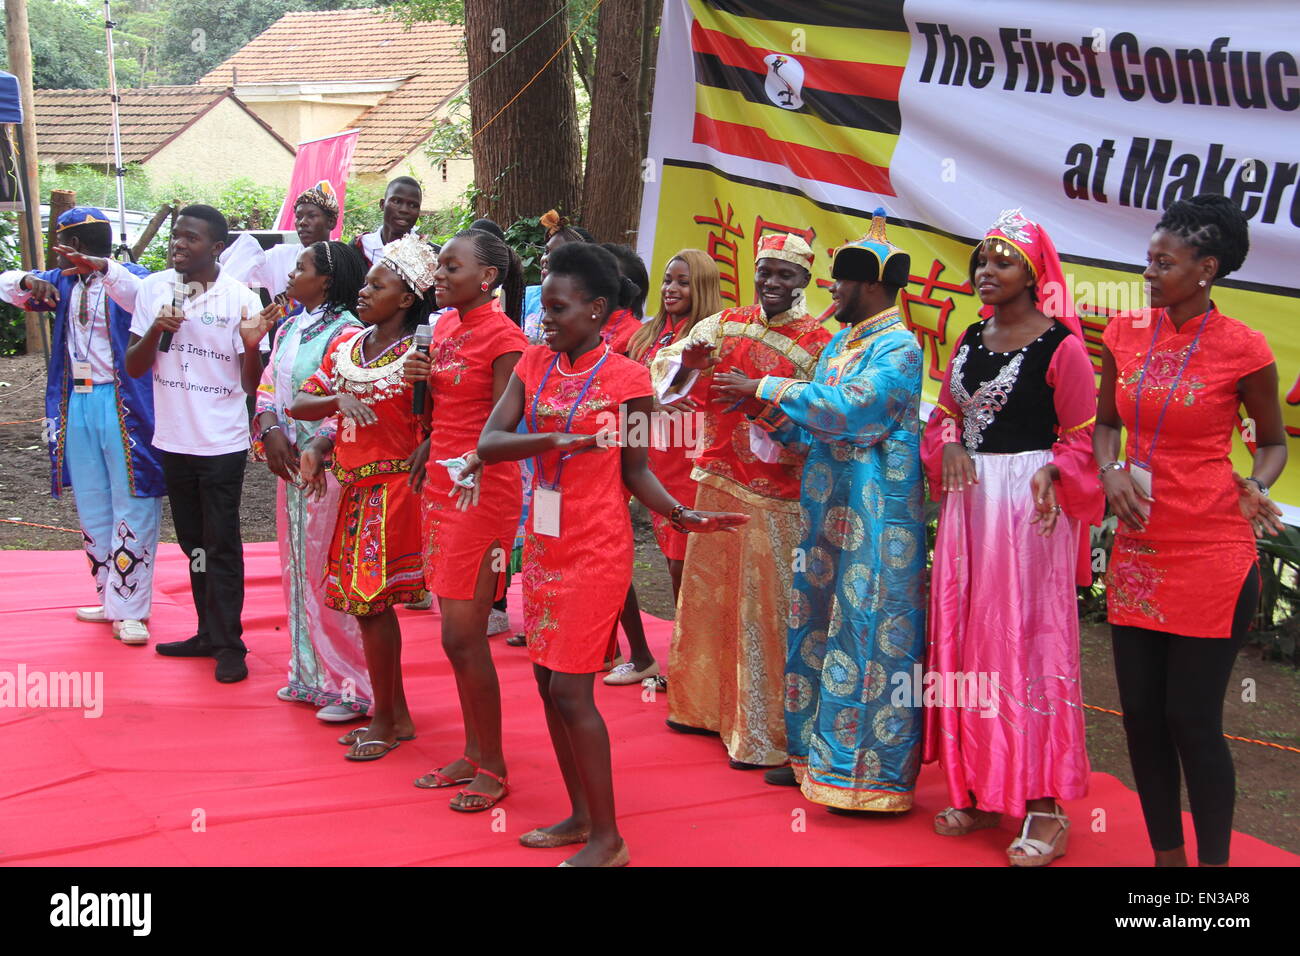 Kampala, Uganda. 25th Apr, 2015. Local students sing Chinese songs during the first Confucius Institute Open Day at Makerere University in Kampala, Uganda, April 25, 2015. The first Confucius Institute Open Day at Makerere University was held on Saturday in Kampala. © Yuan Qing/Xinhua/Alamy Live News Stock Photo